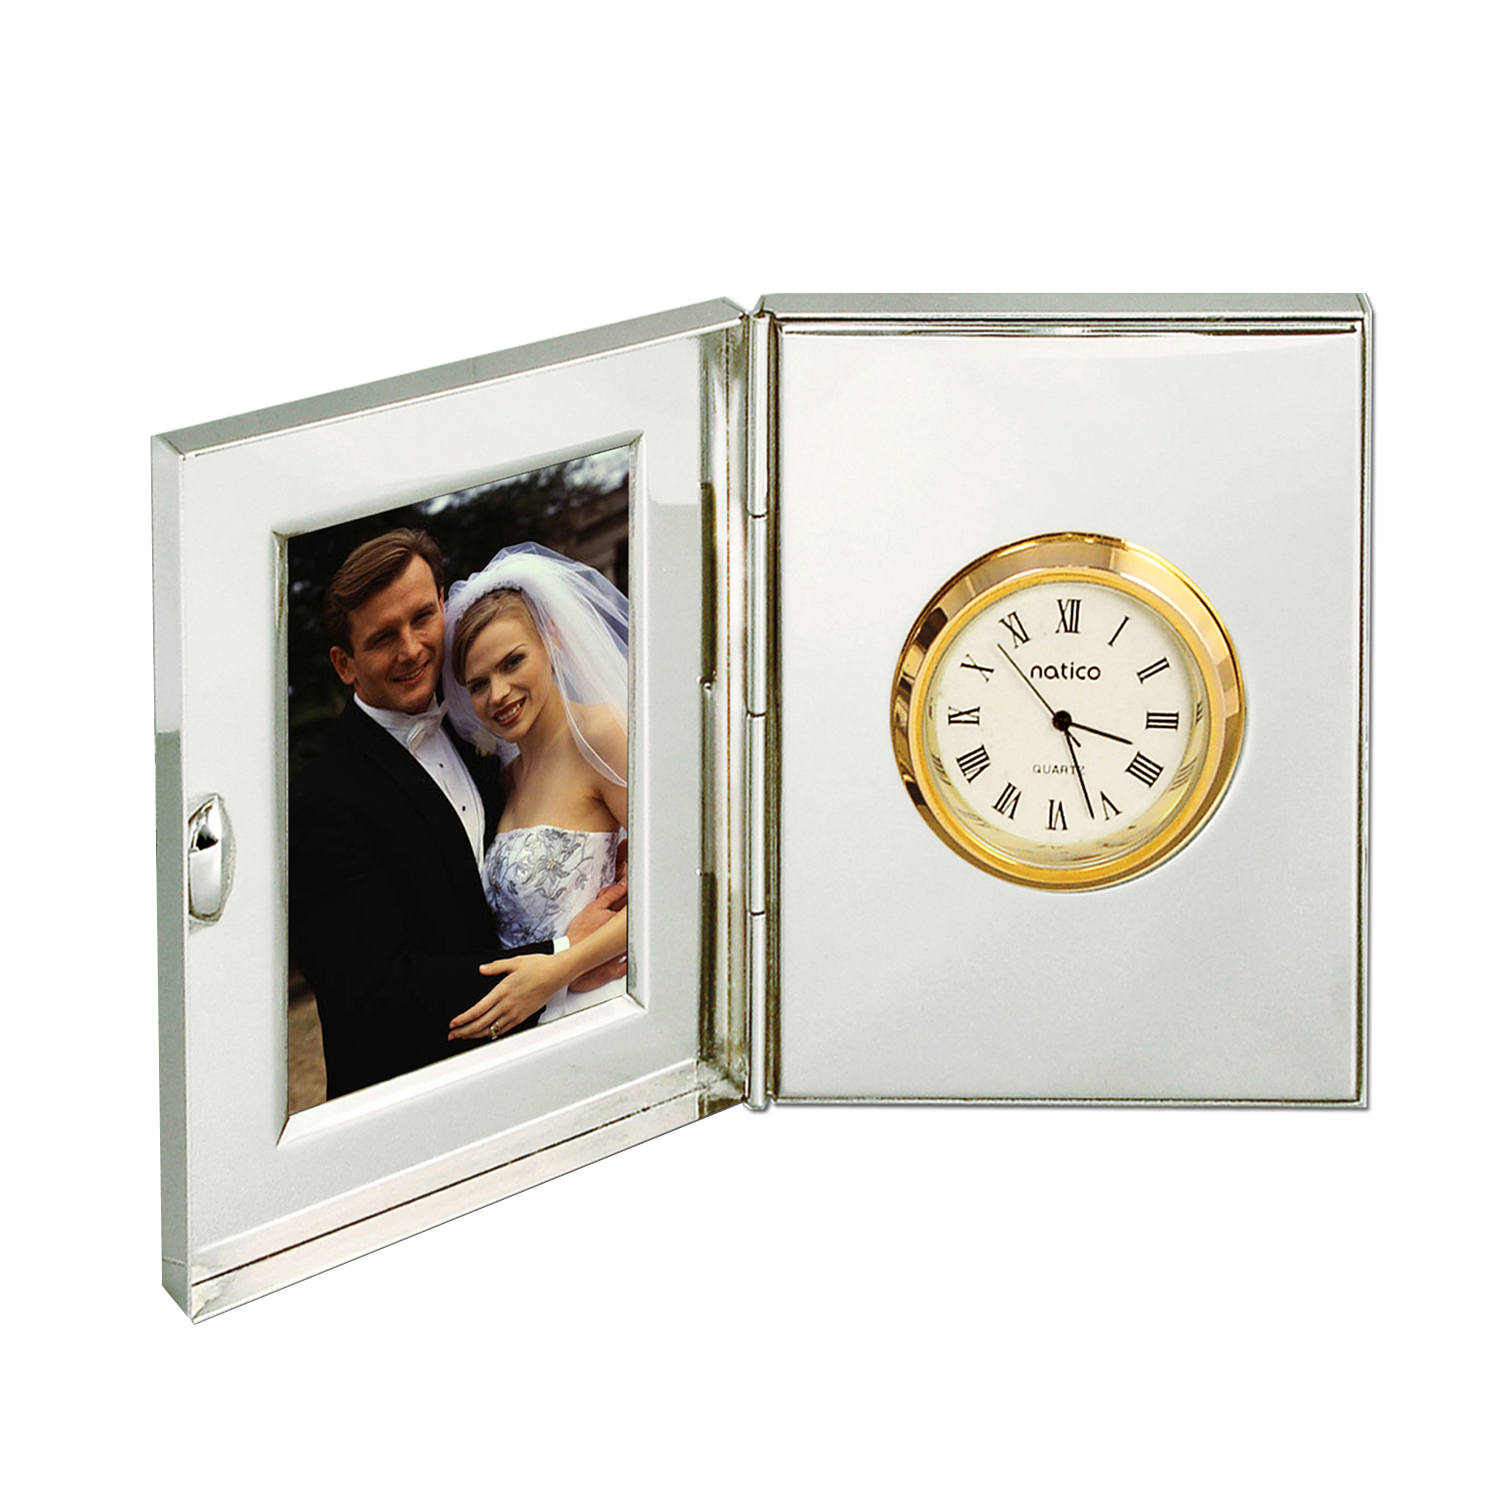 Natico 10-107 Silver Clock and Frame, Book Style